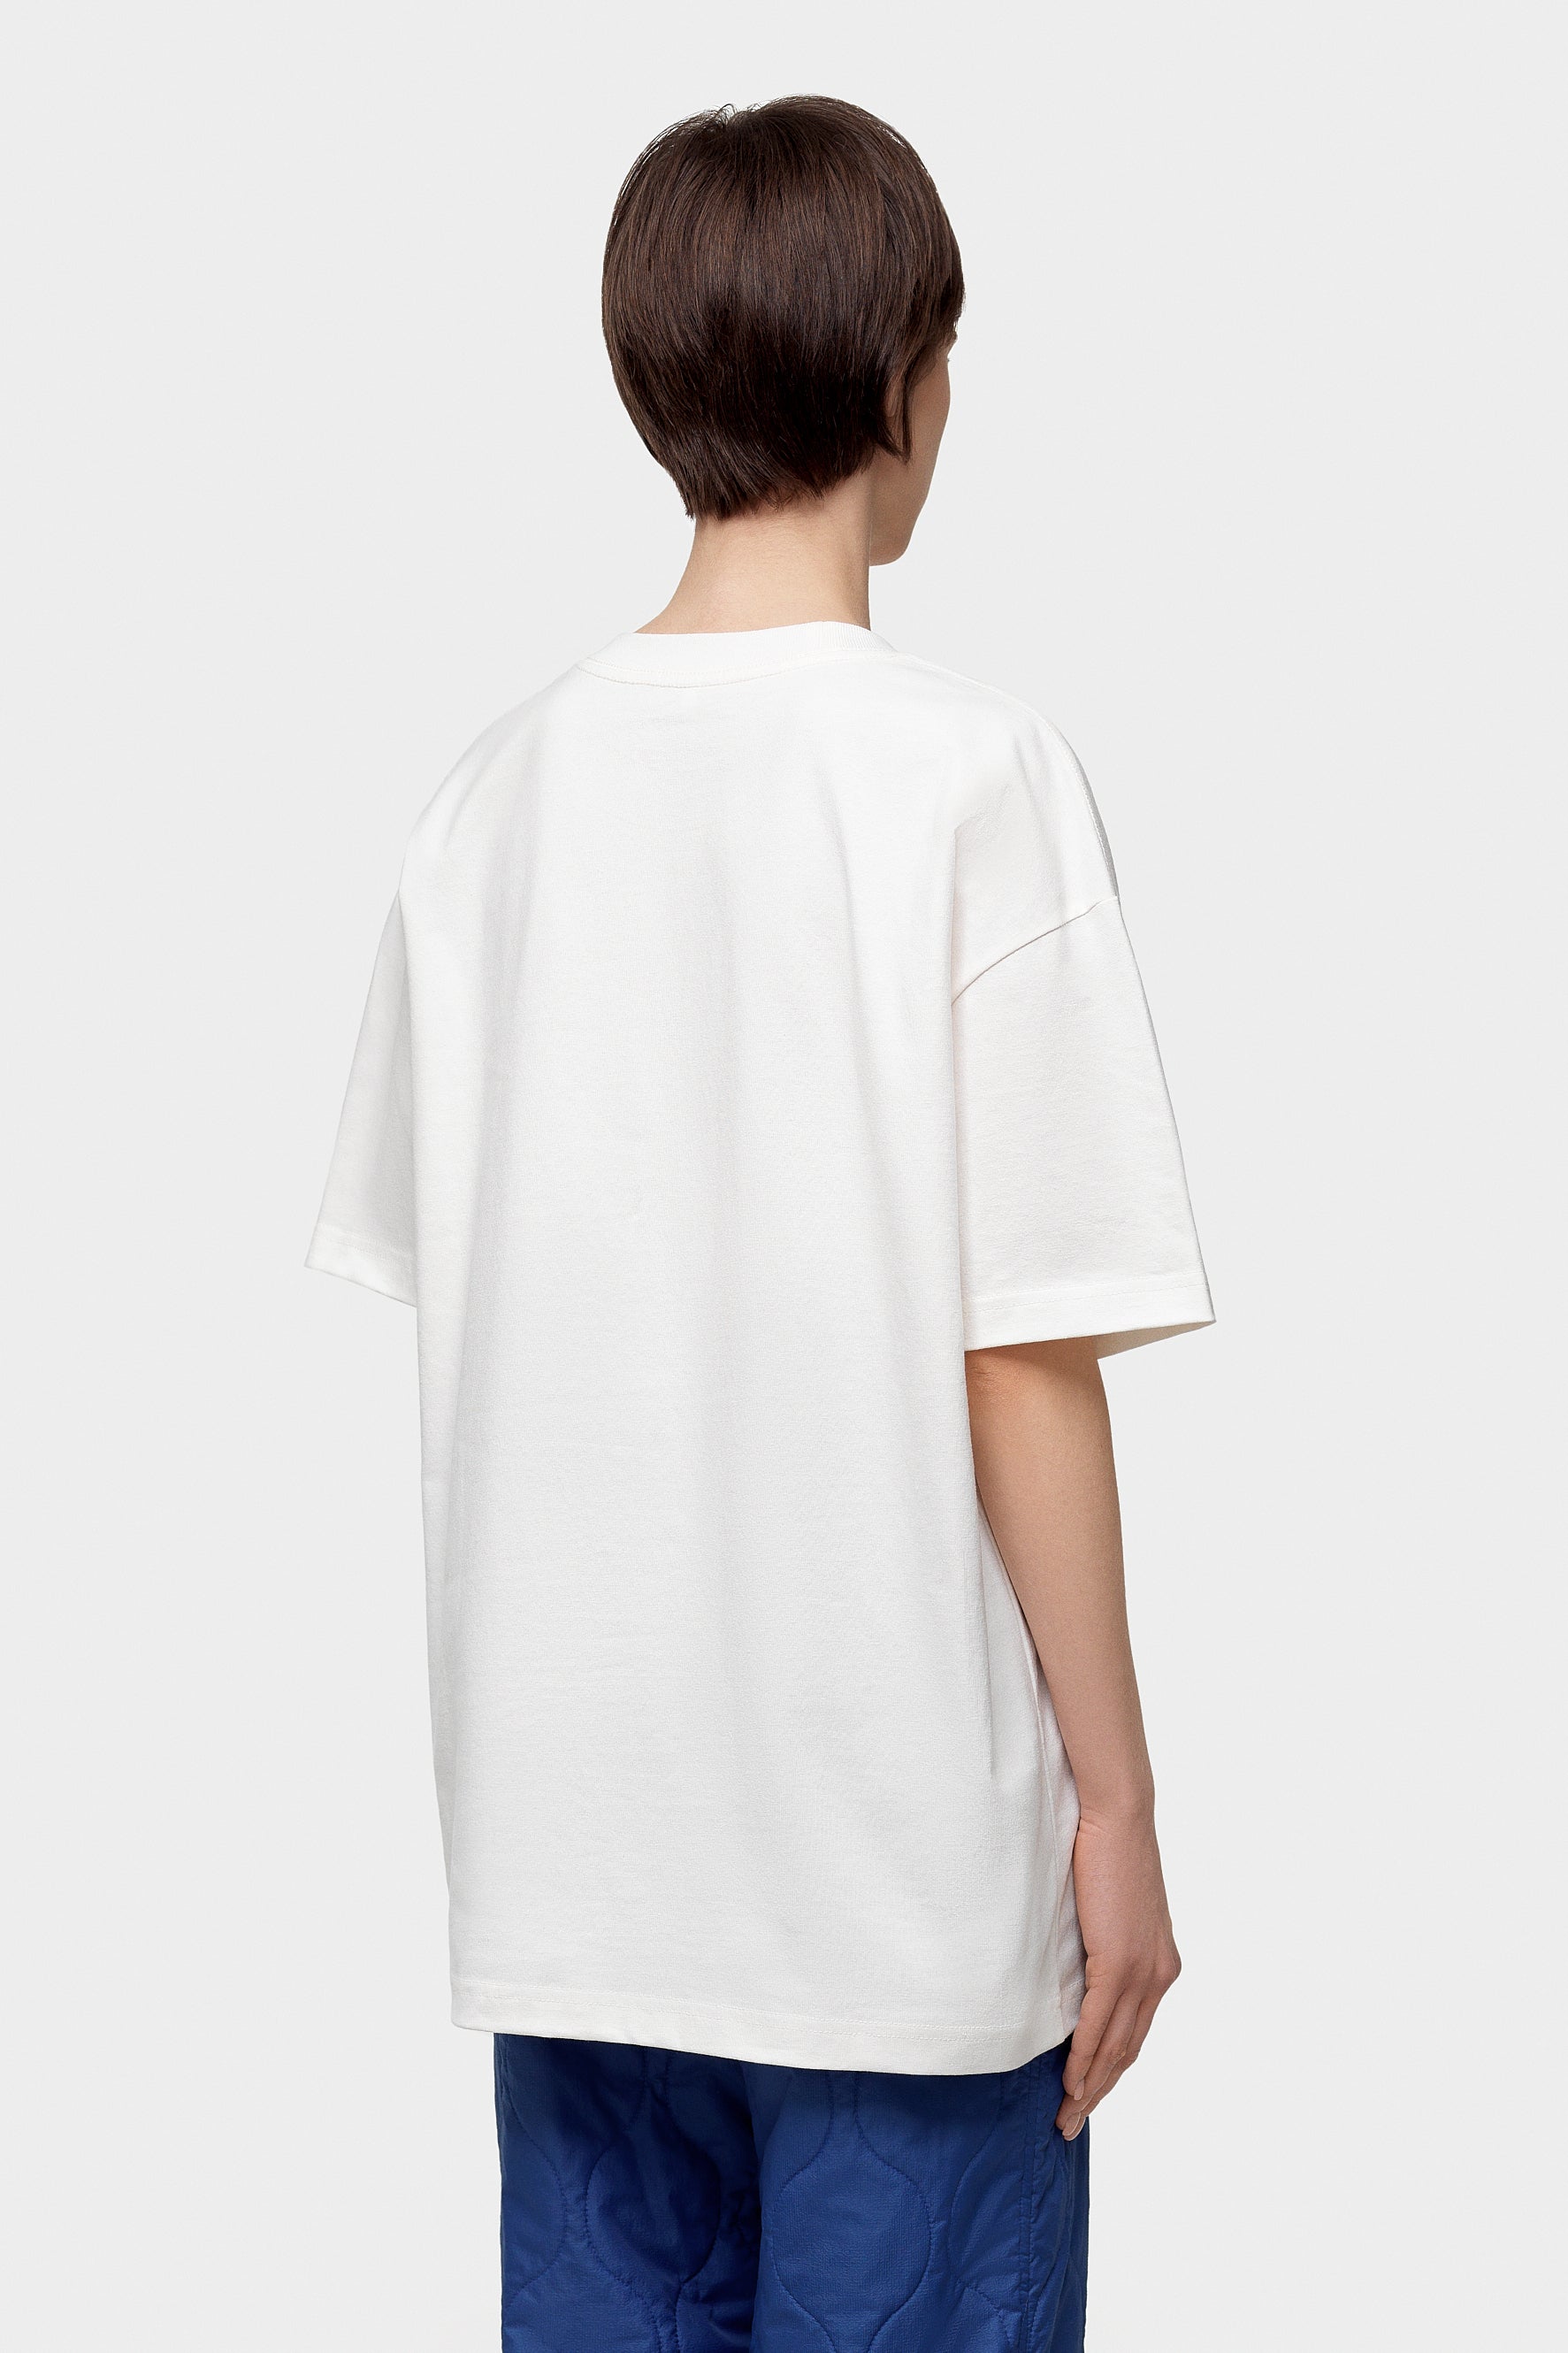 T-shirt White + Forest